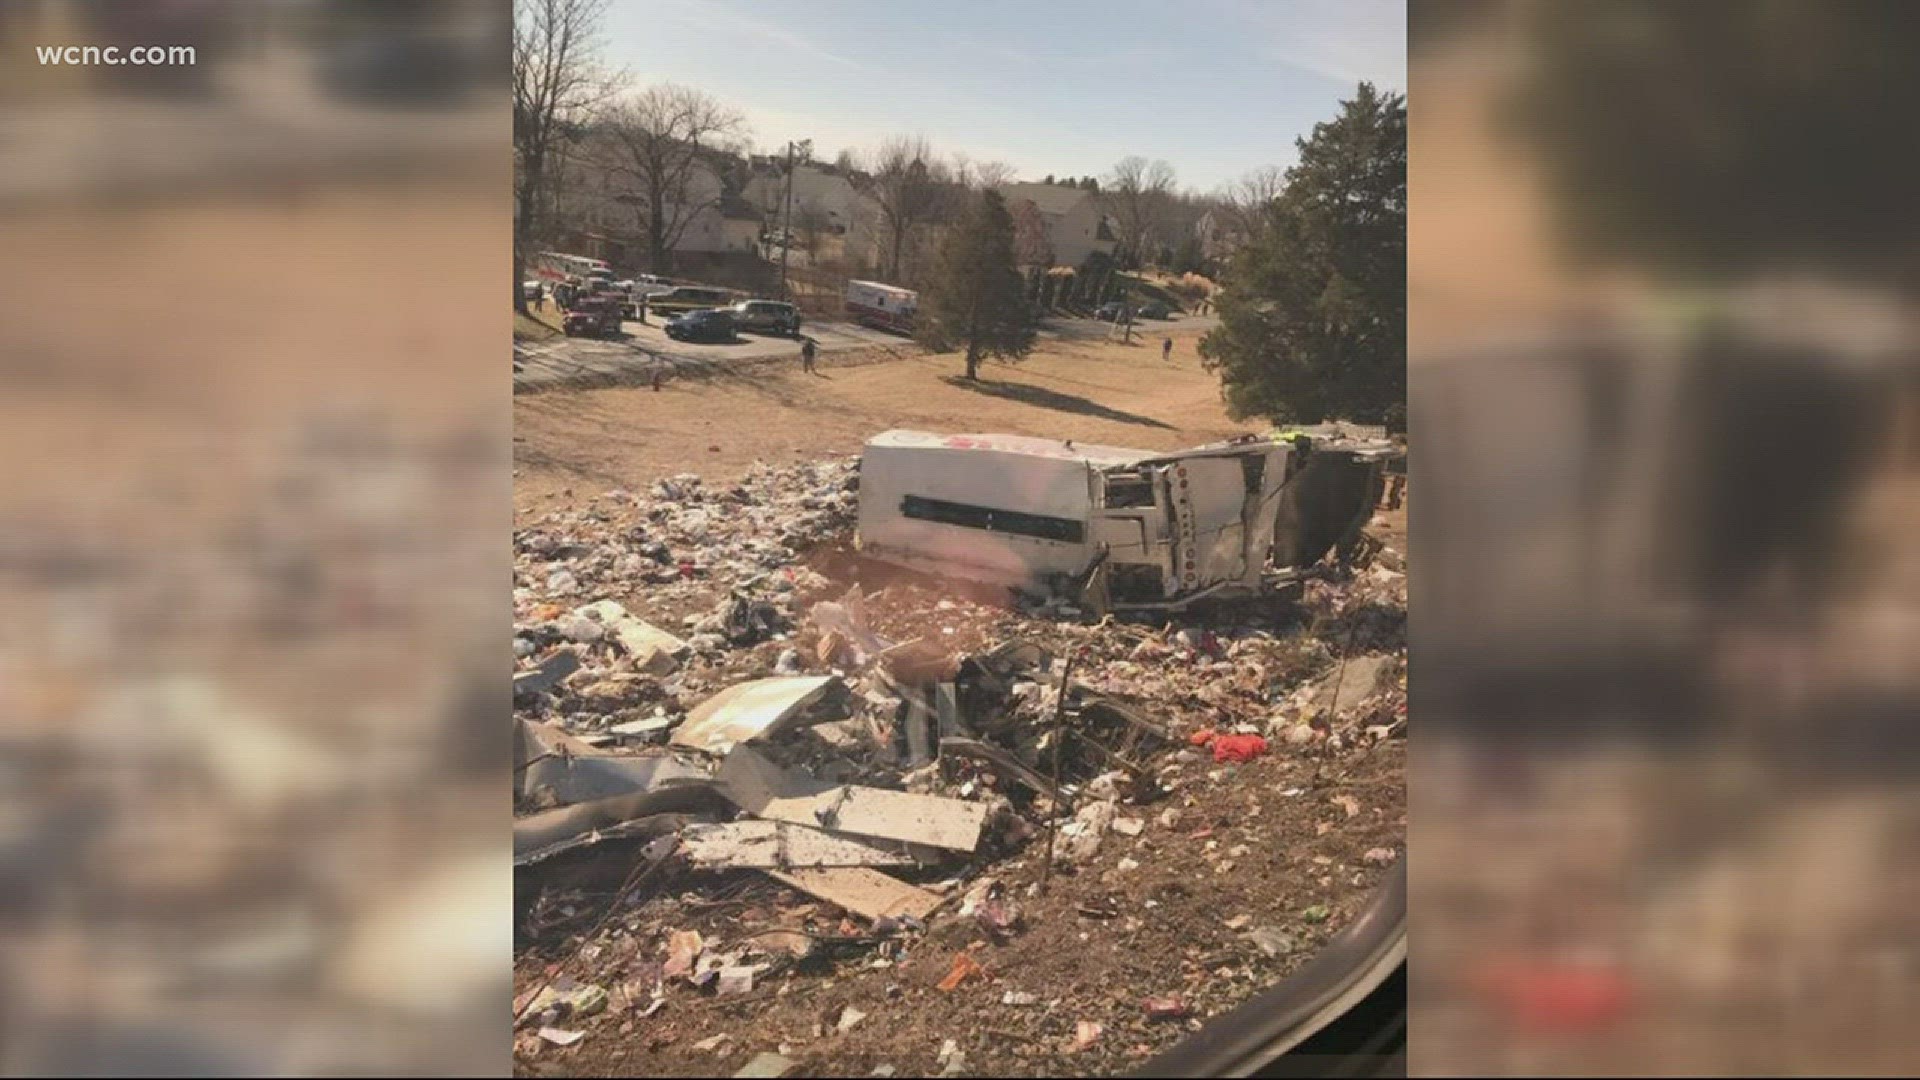 A train carrying several Republican lawmakers to a retreat in West Virginia collided with a truck in Virginia Wednesday.